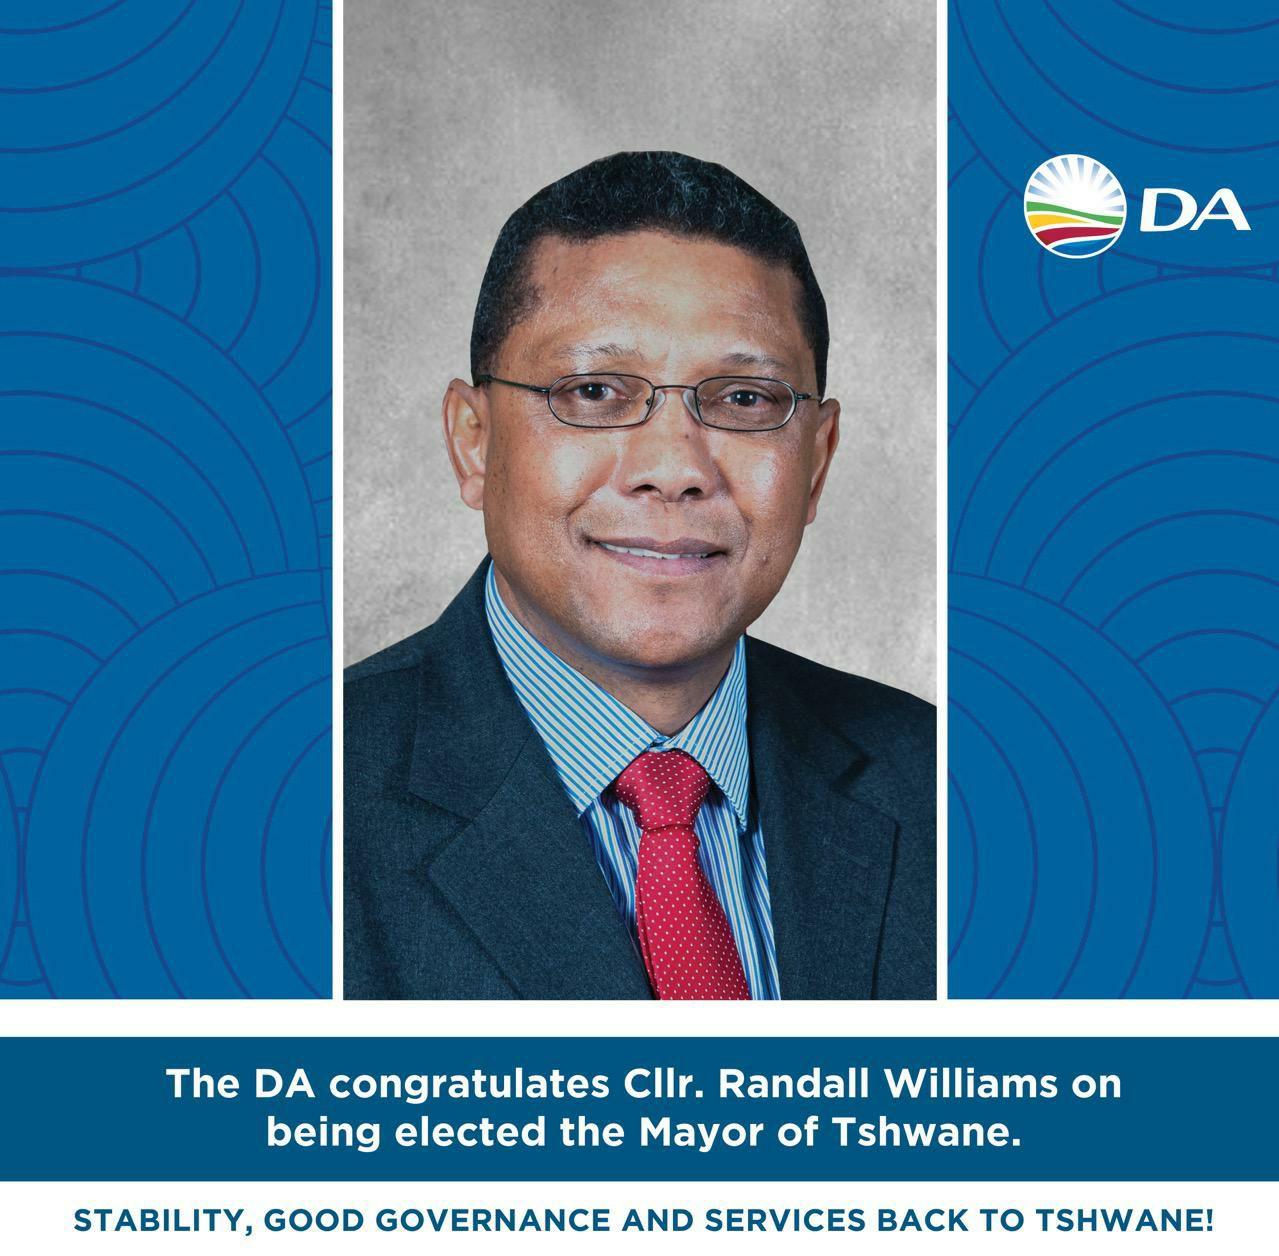 Mayor Williams will restore DA stability, good governance, and service delivery to Tshwane